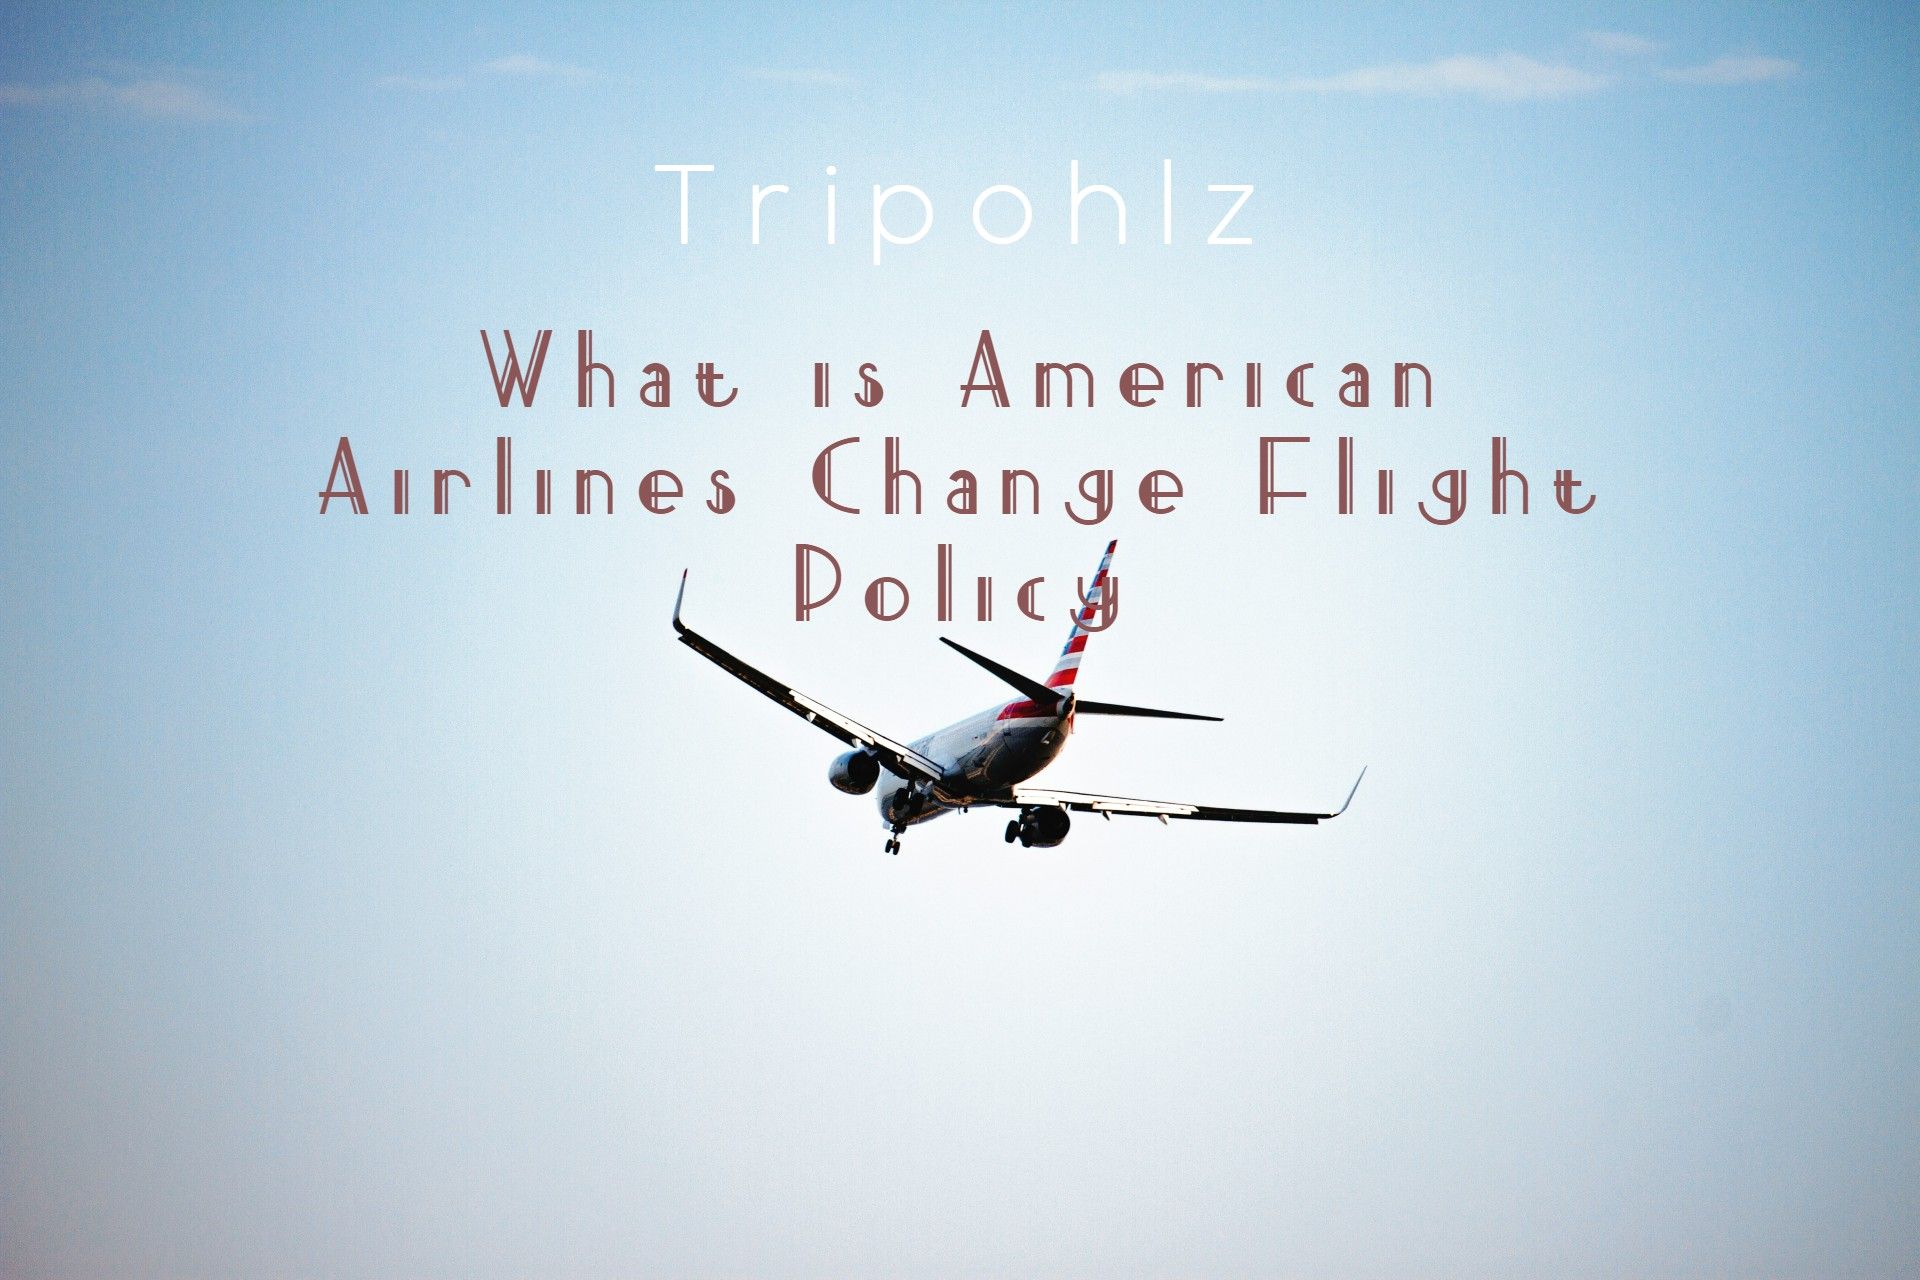 What is American Airlines Change Flight Policy?